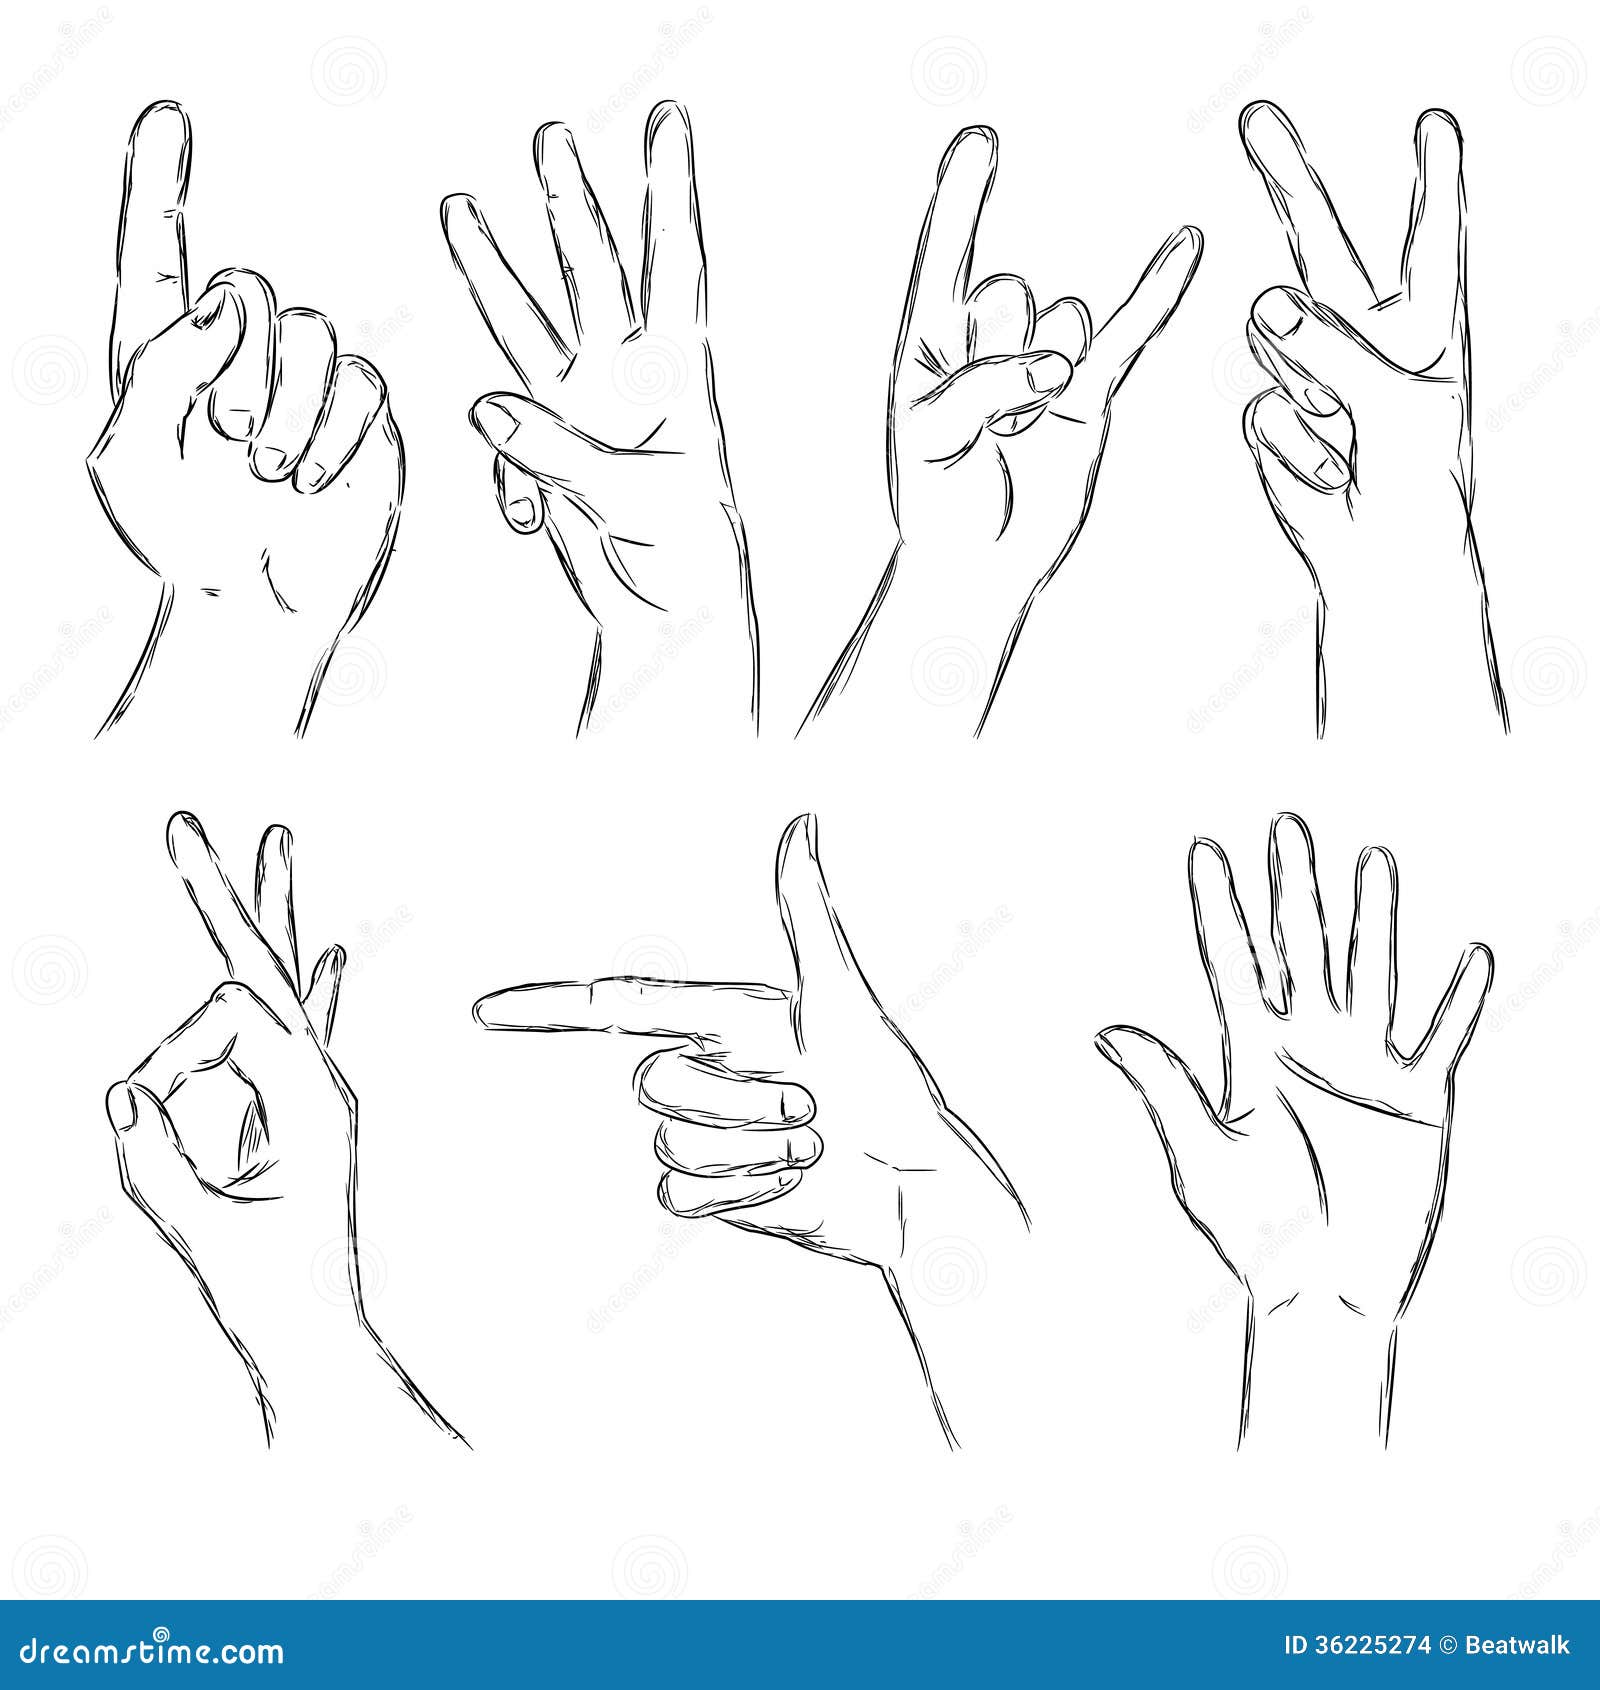 Cartoon Hand Drawing - How To Draw A Cartoon Hand Step By Step